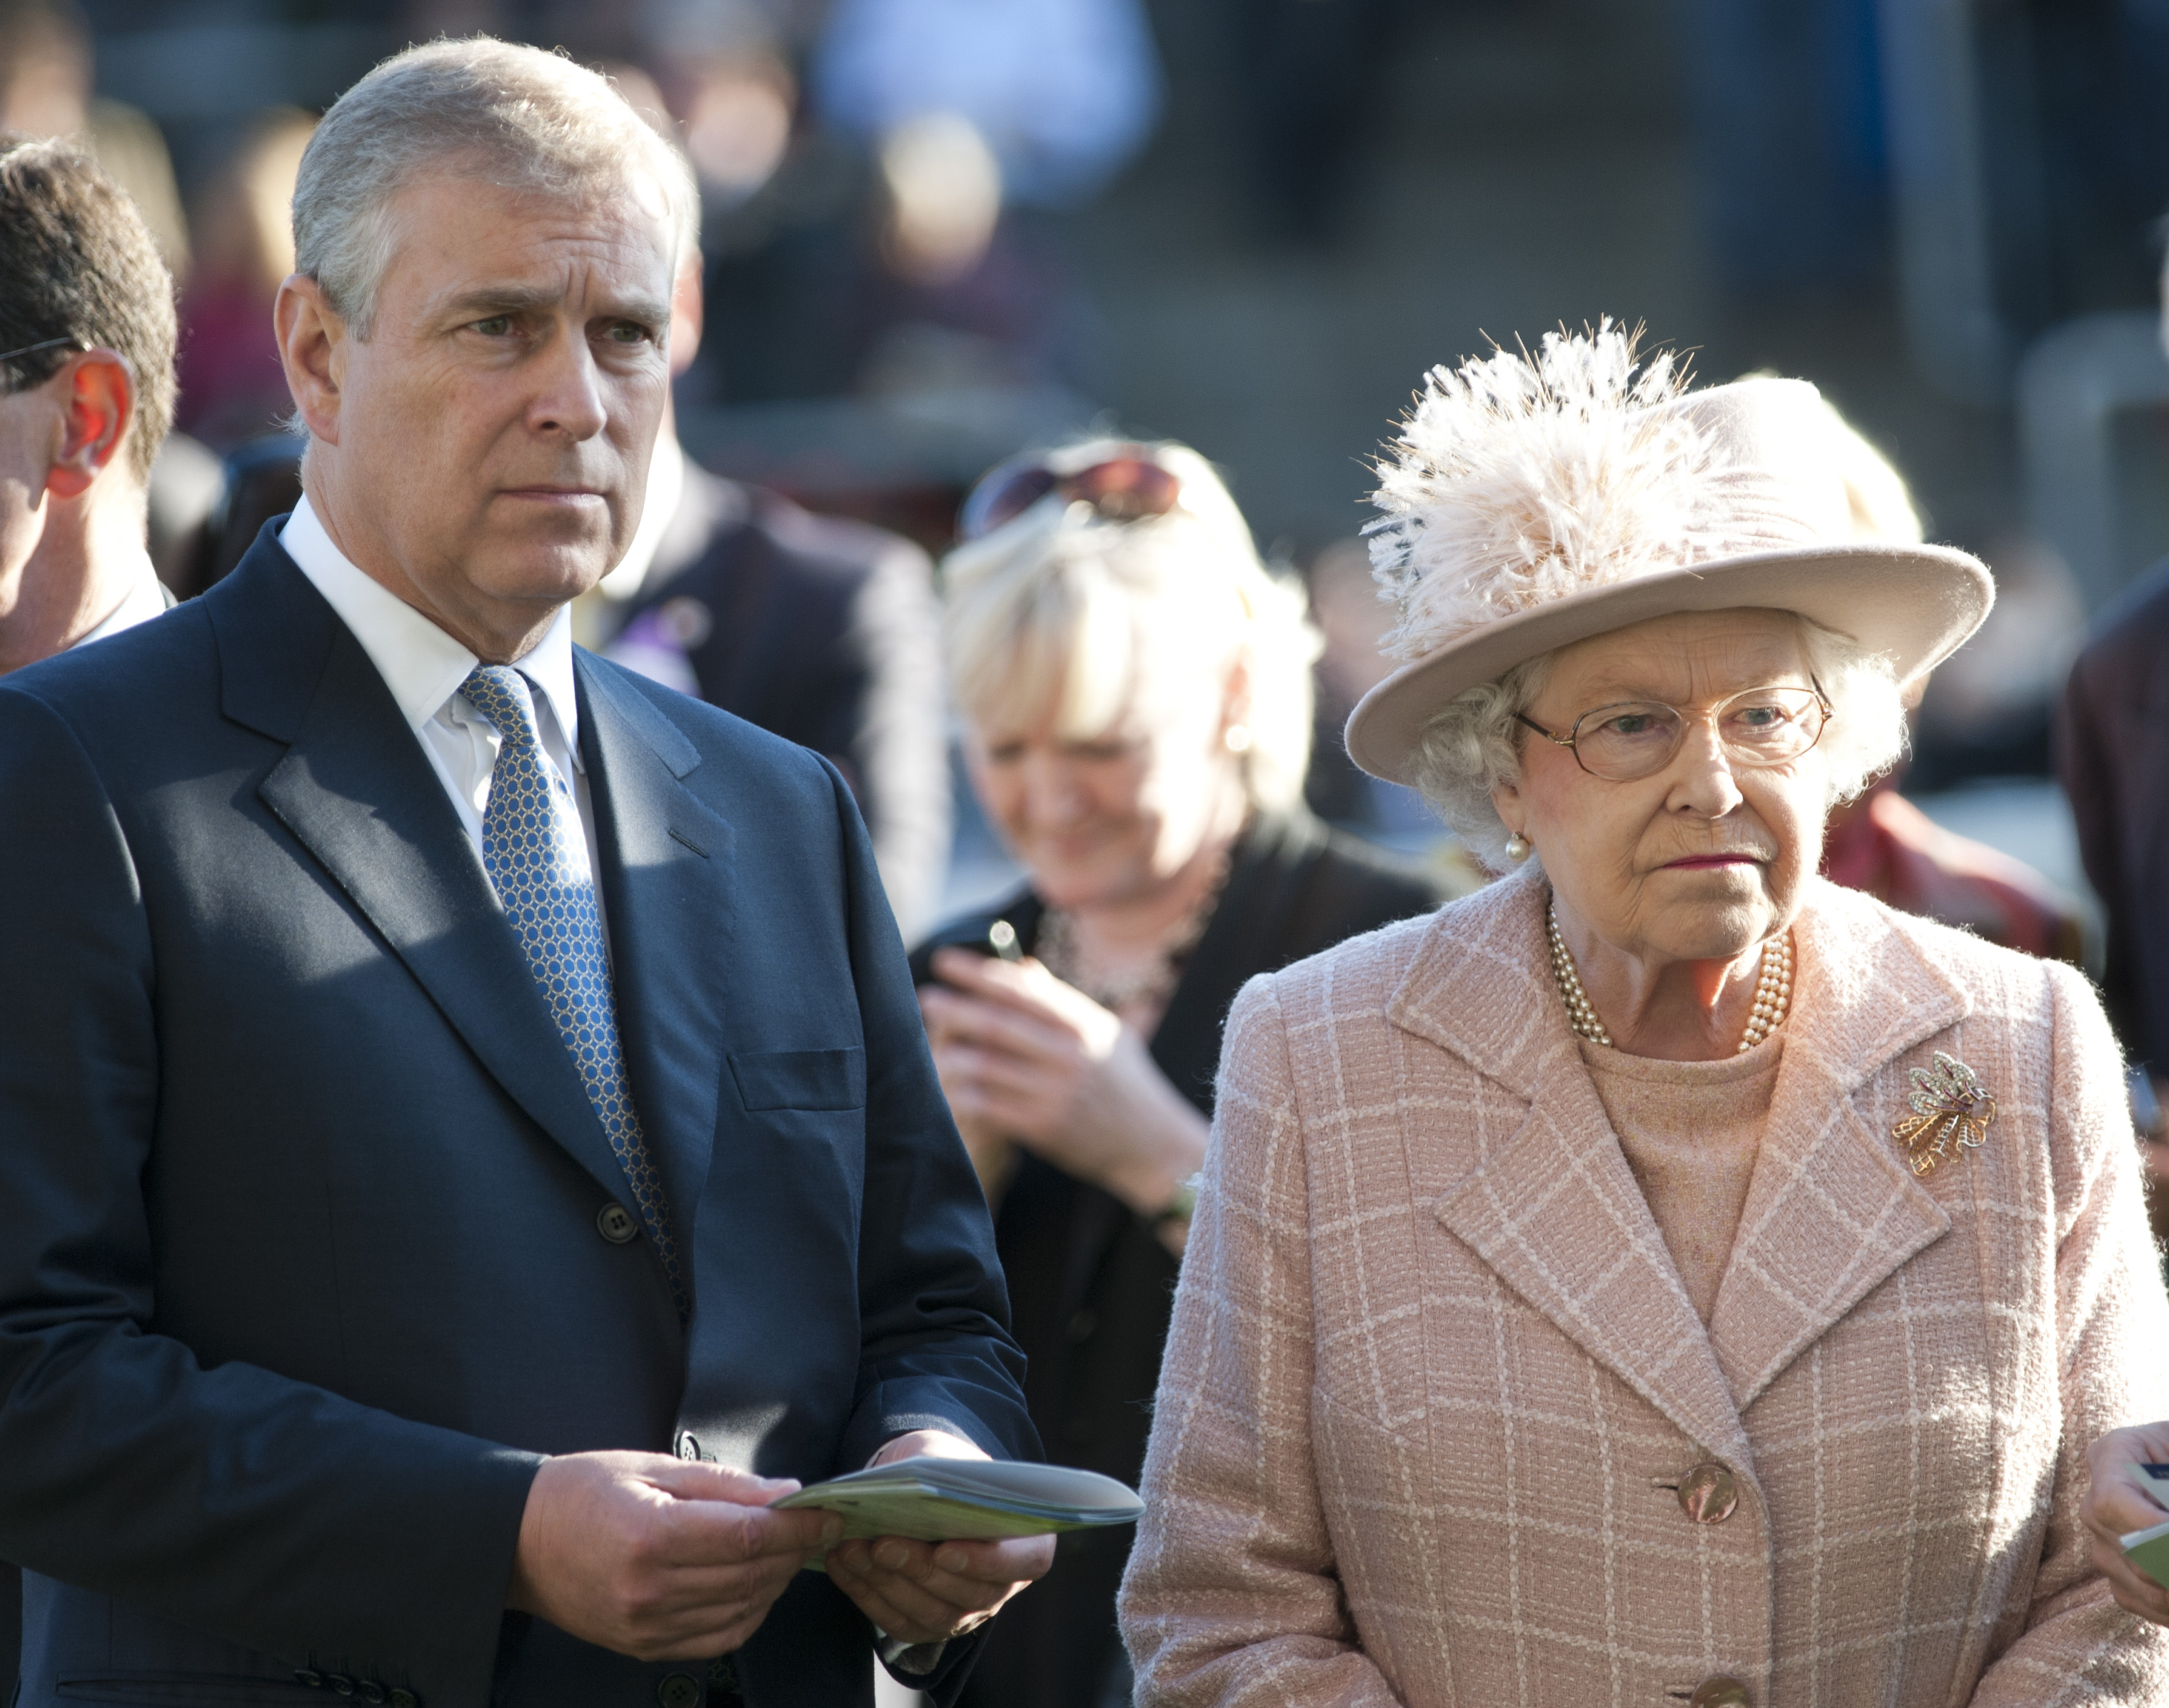 Queen Elizabeth II and Prince Andrew standing next to one another at Ascot Racecourse